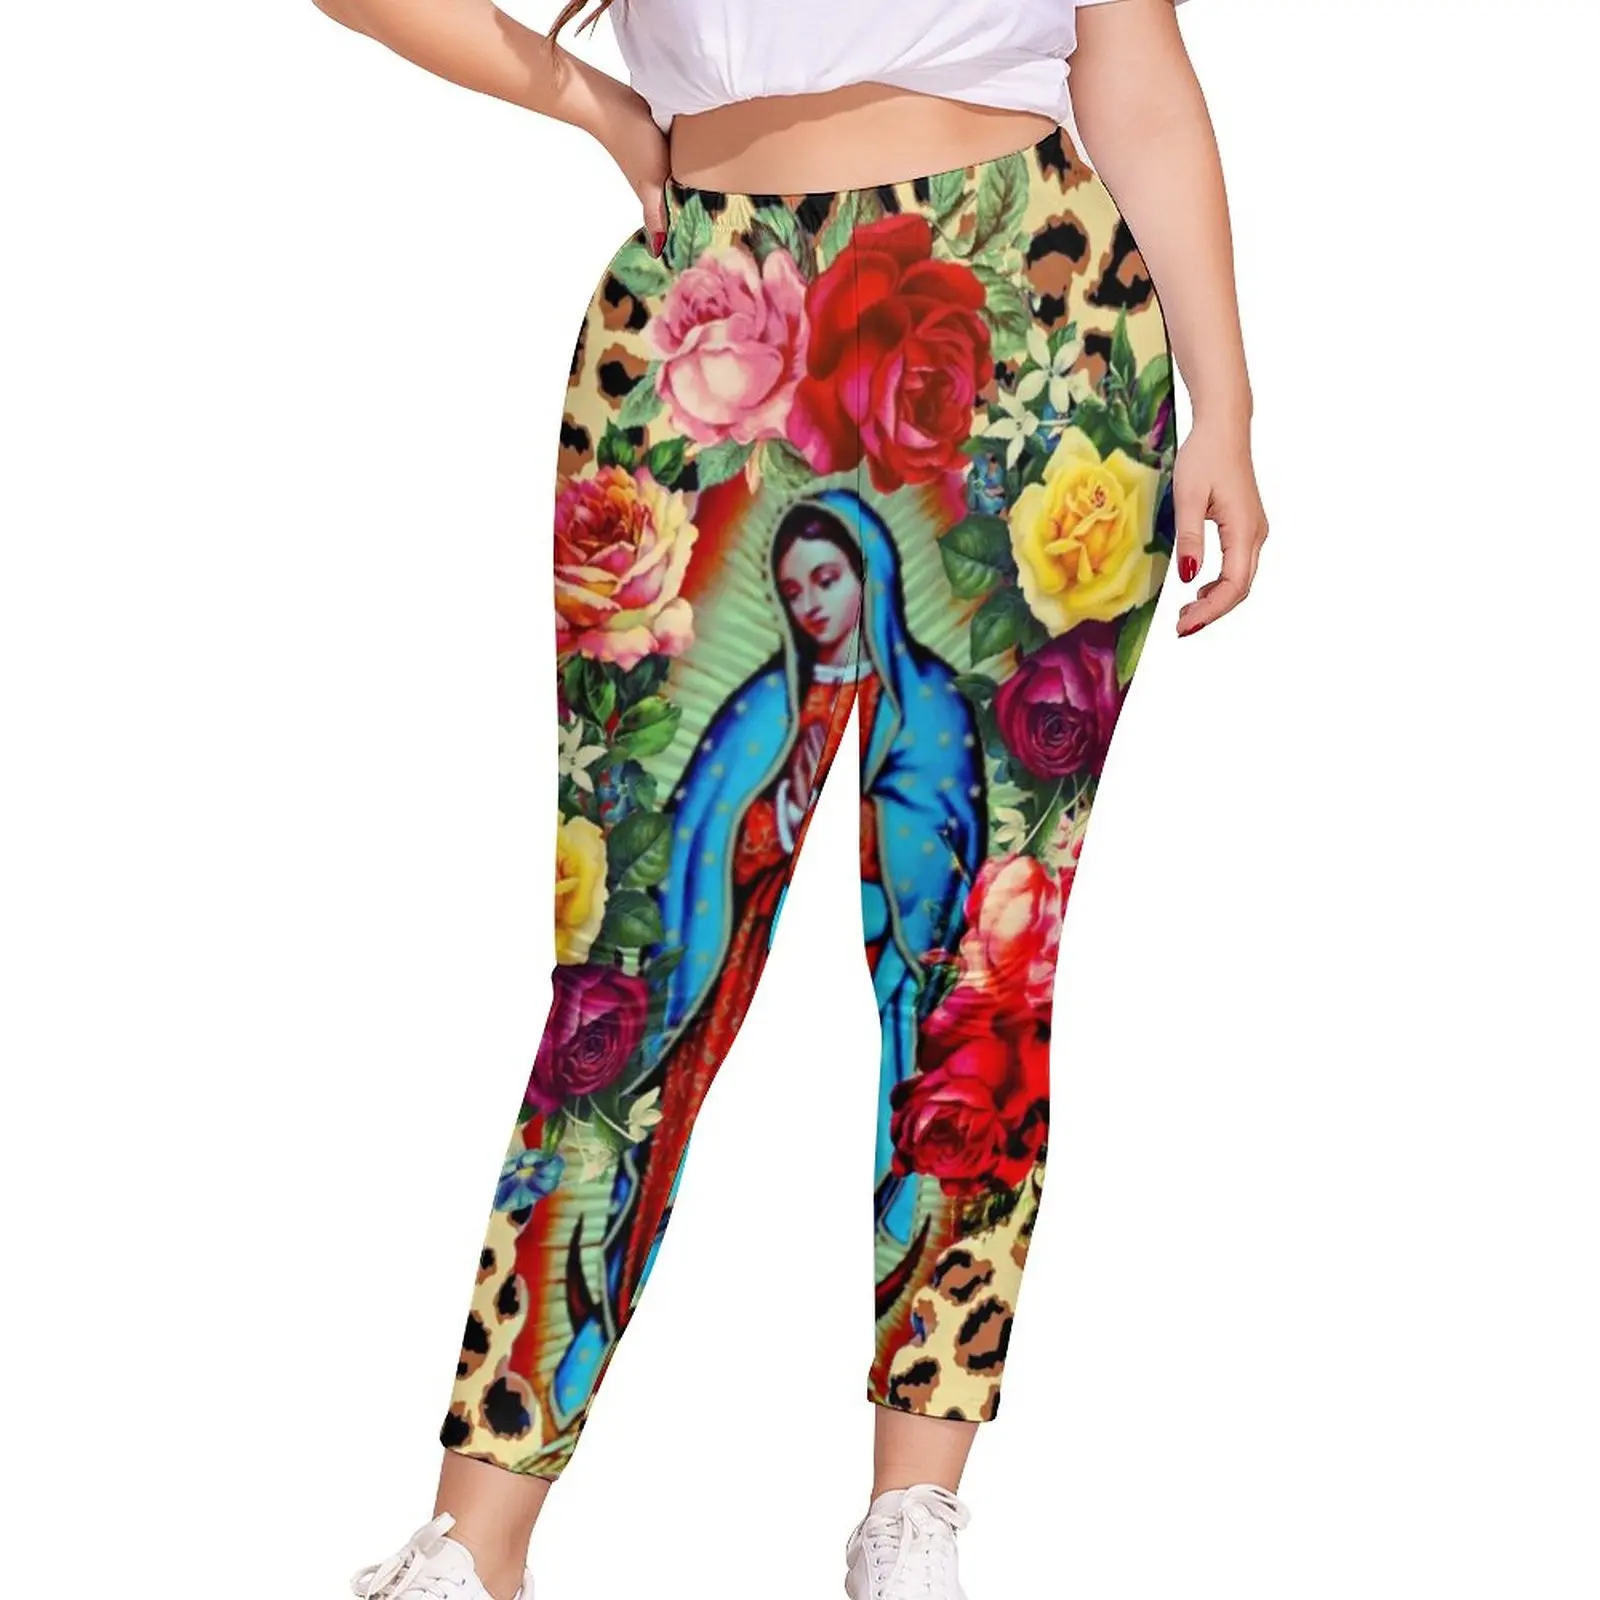 

Guadalupe Virgin Mary Leggings Floral Print Cycling Pattern Leggins Women Push Up Sexy Pants Gift Idea